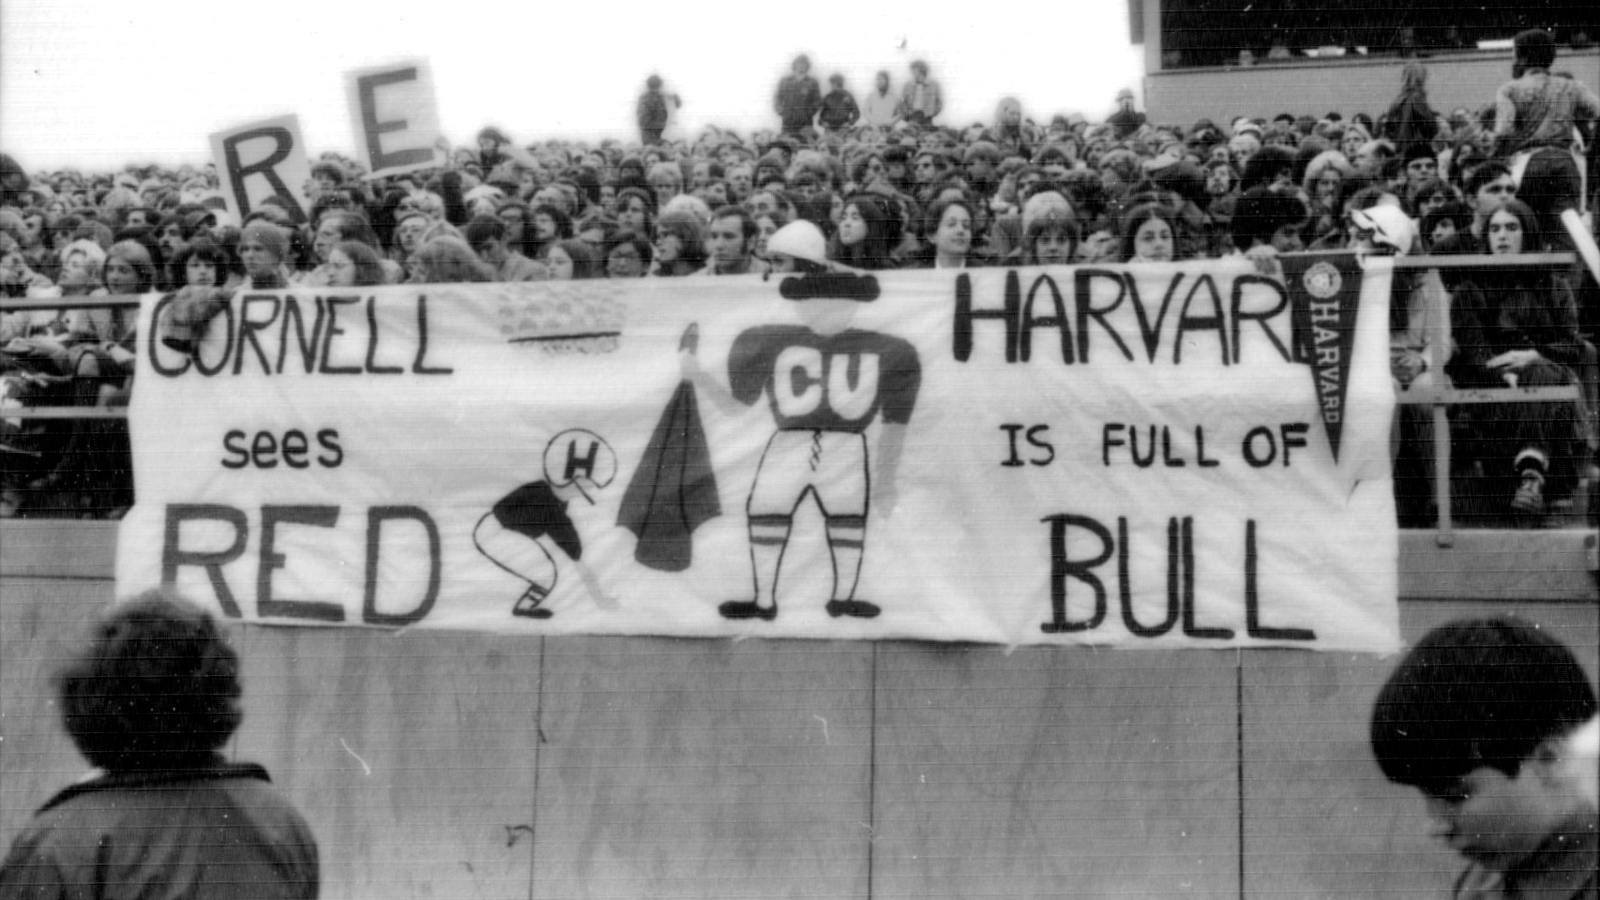 A provocative banner at Schoellkopf during a game against Harvard